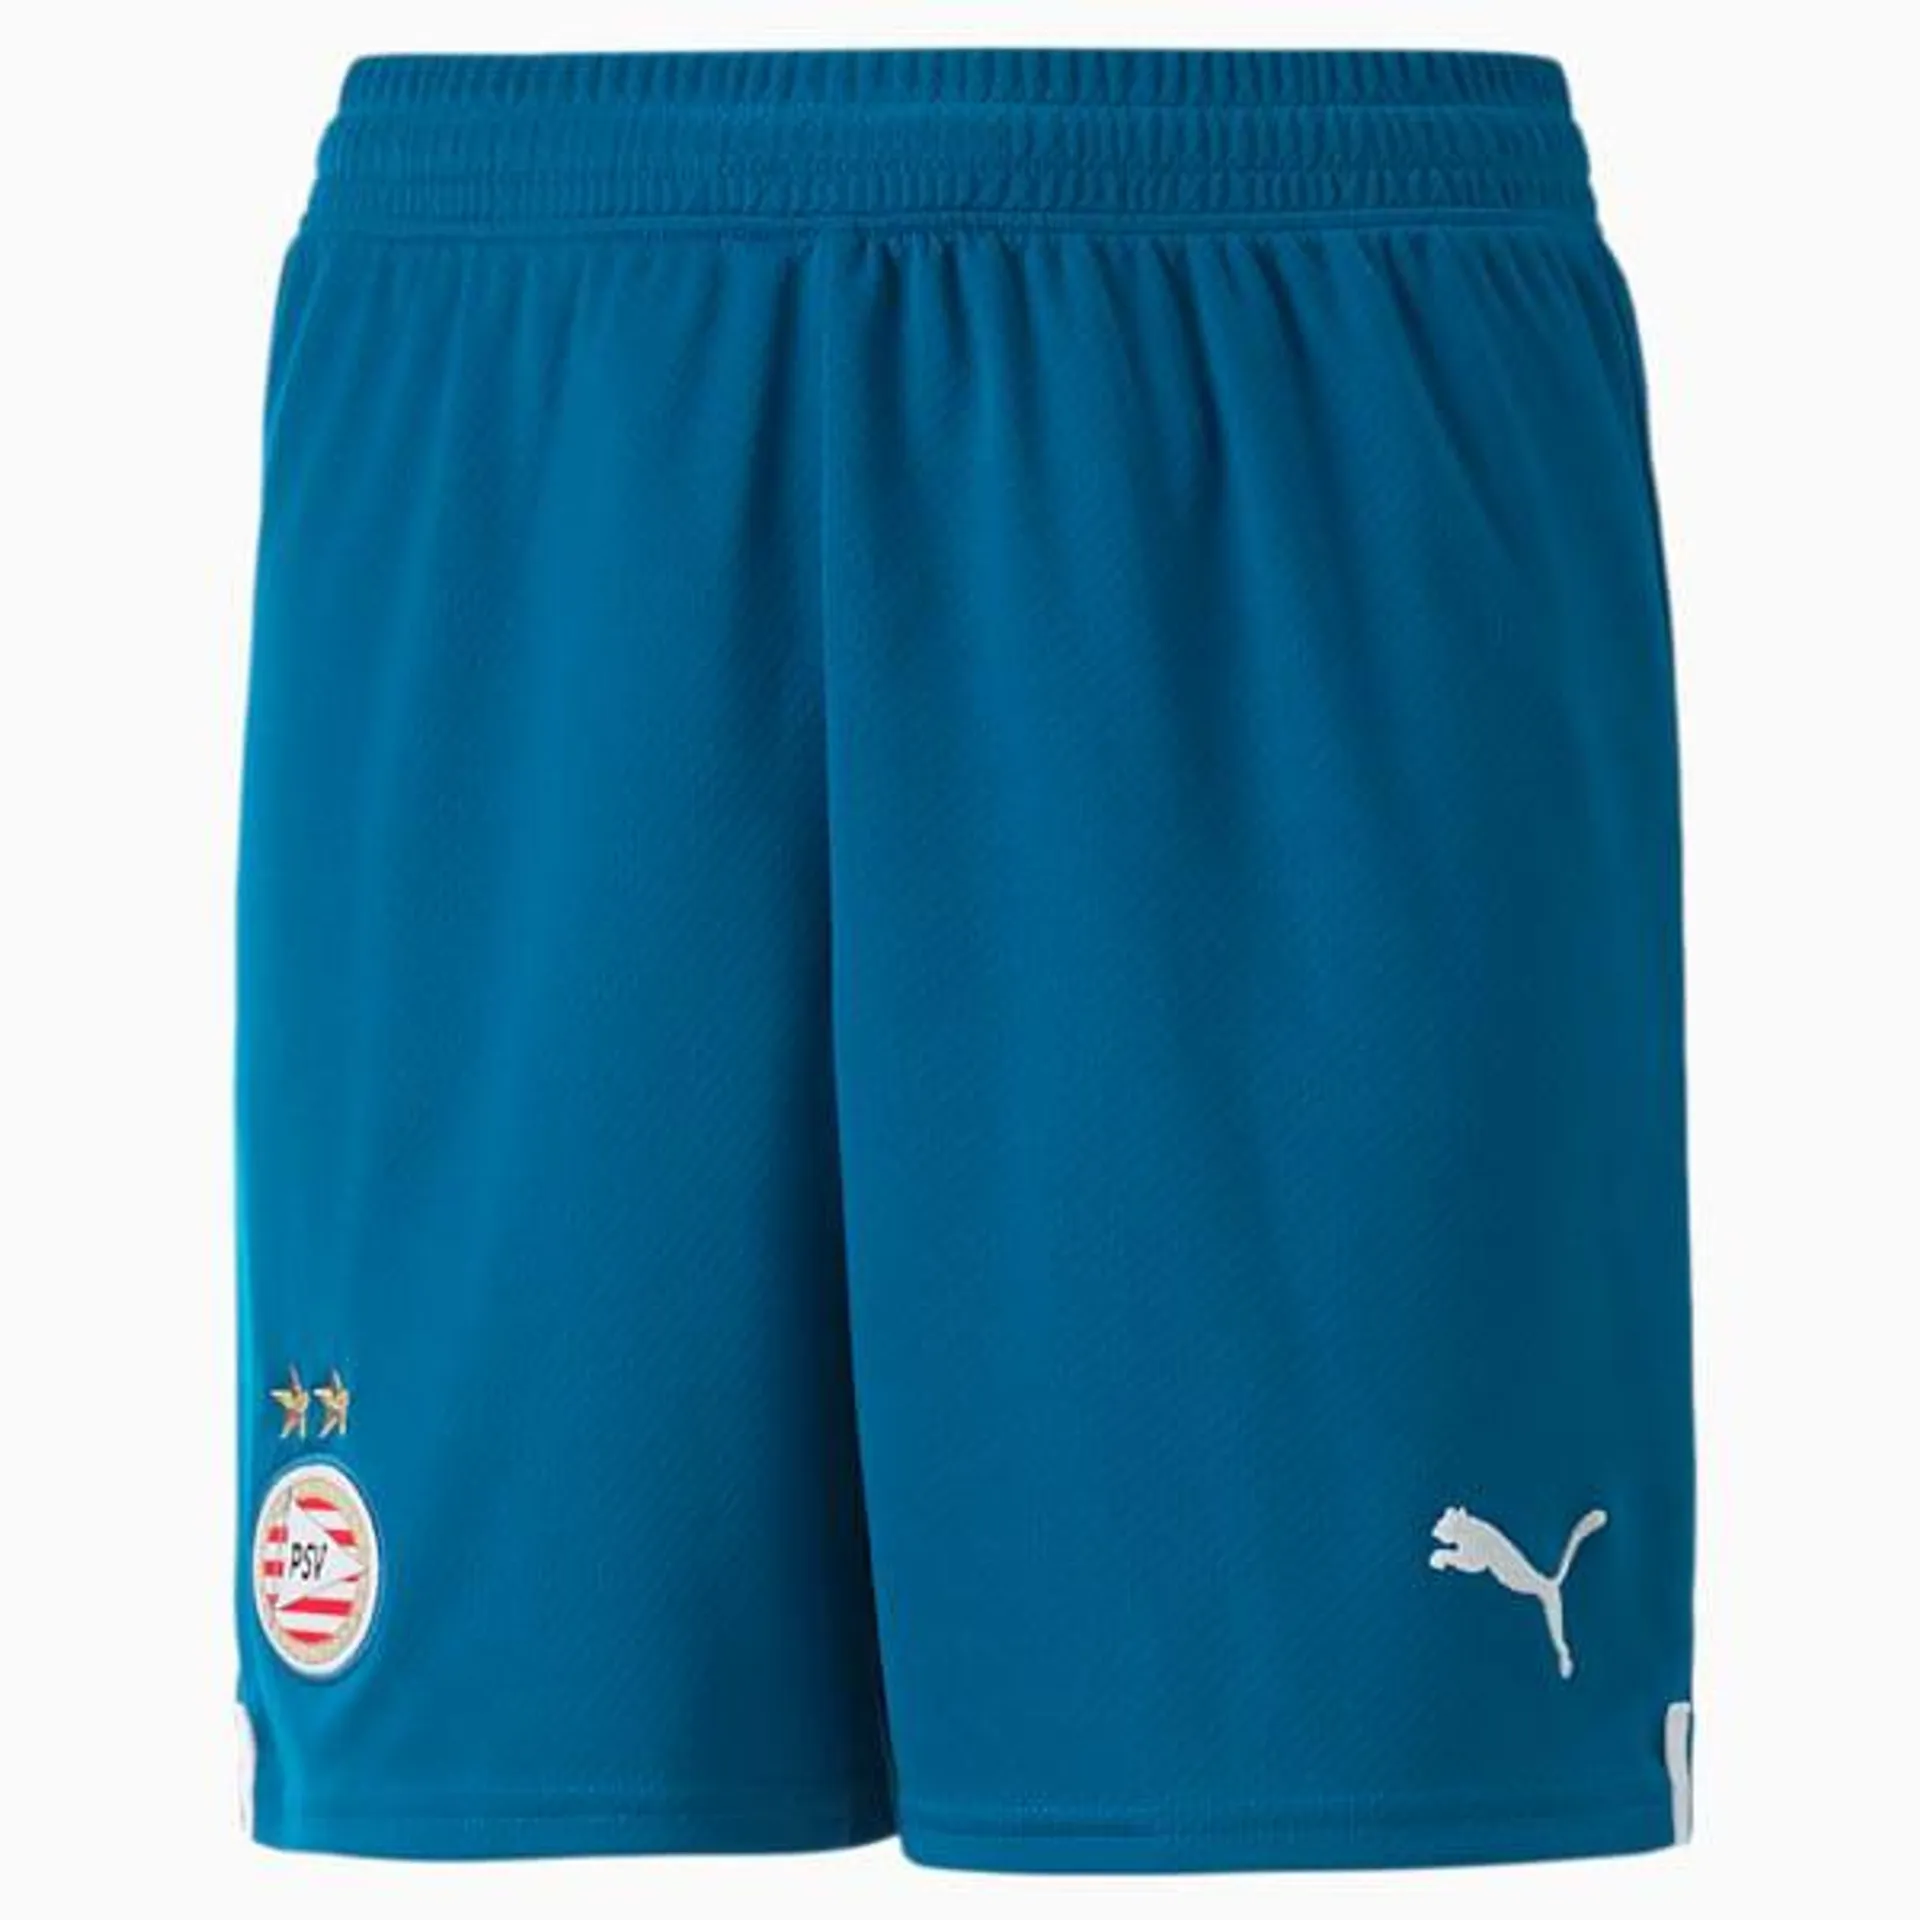 PSV Eindhoven 22/23 Replica Shorts Youth